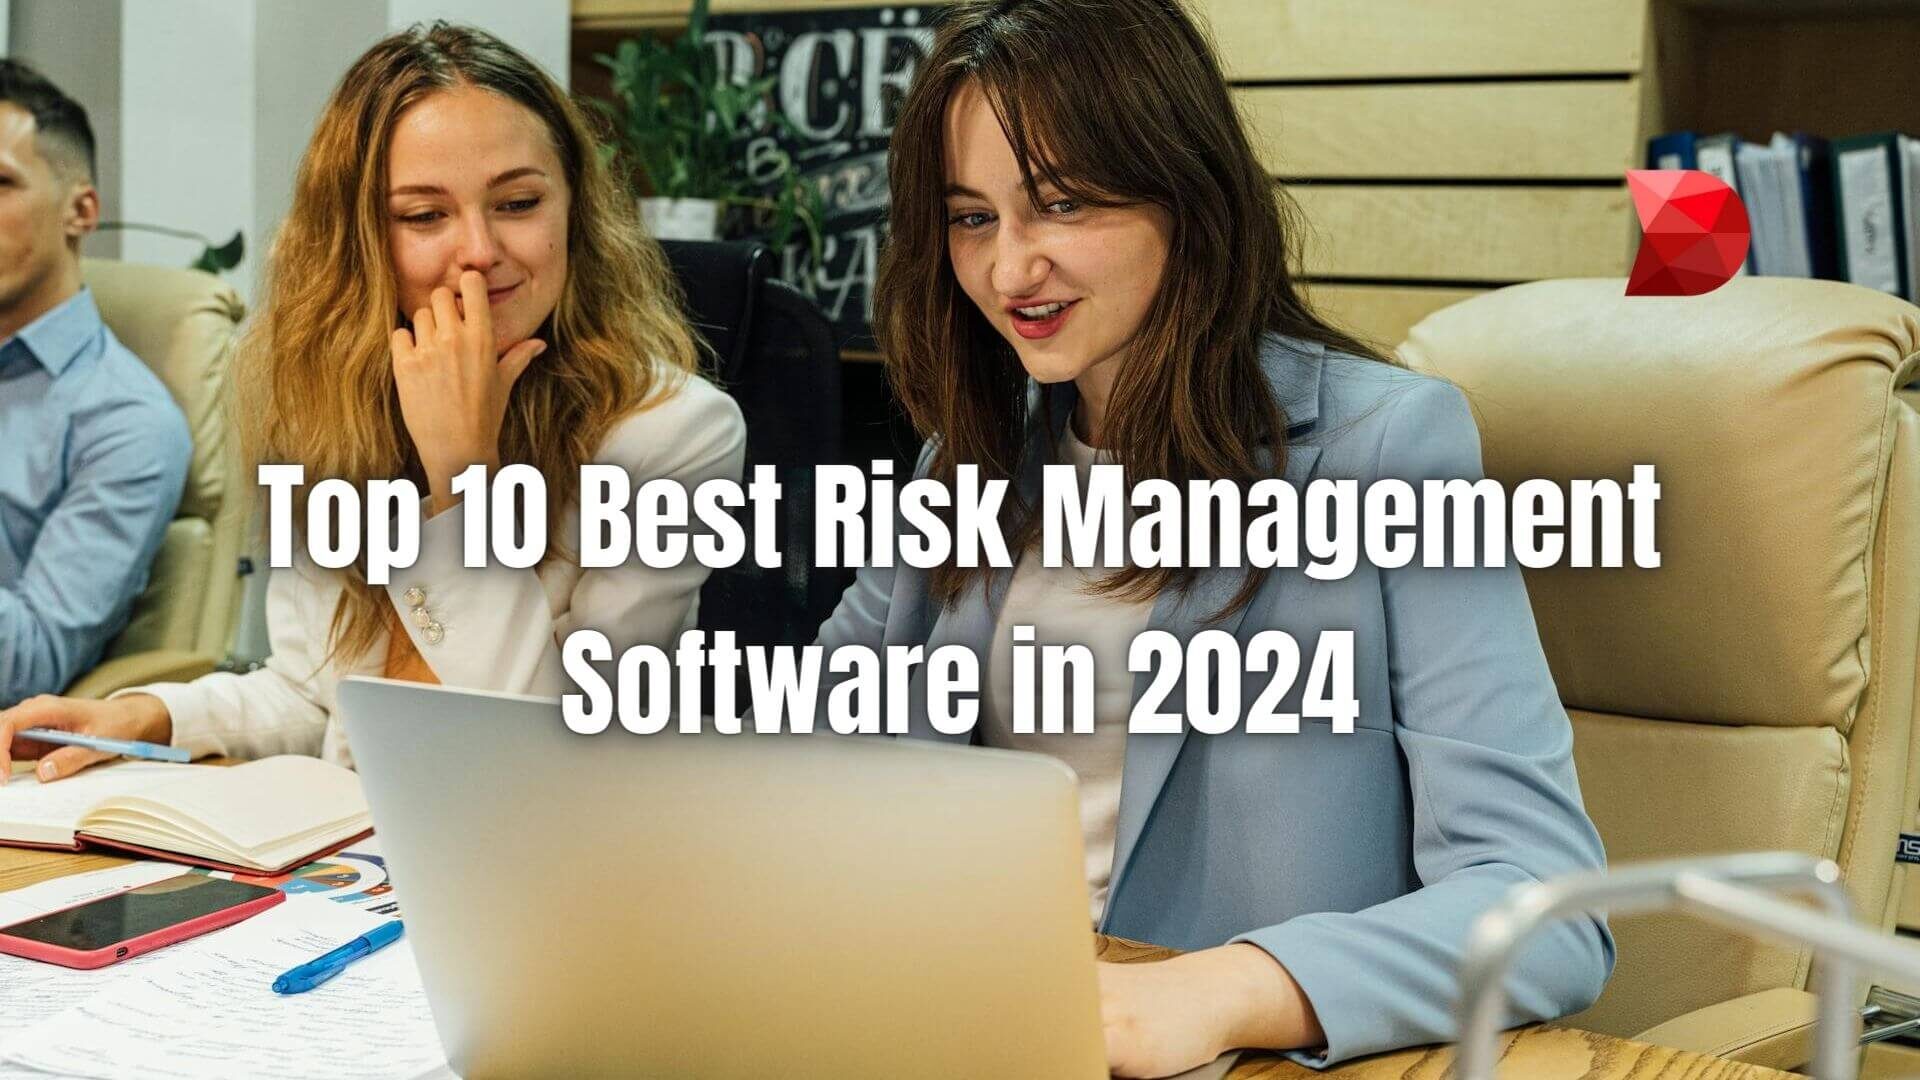 Streamline your risk assessment process efficiently! Explore our full guide to the top 10 risk management software solutions of 2024.